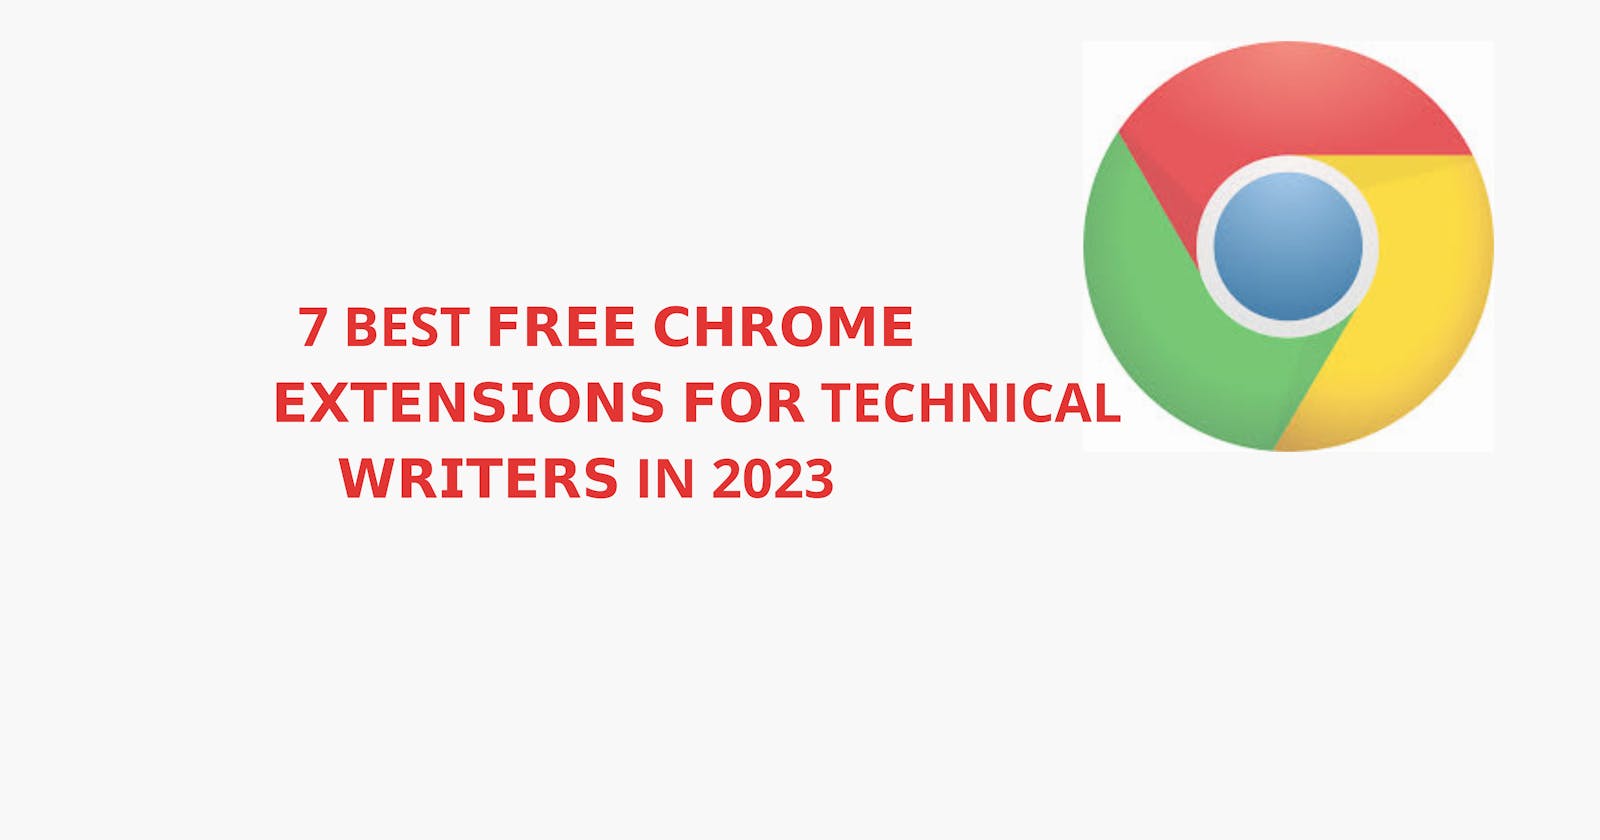 7 Best Free Chrome Extensions For Technical Writers in 2023